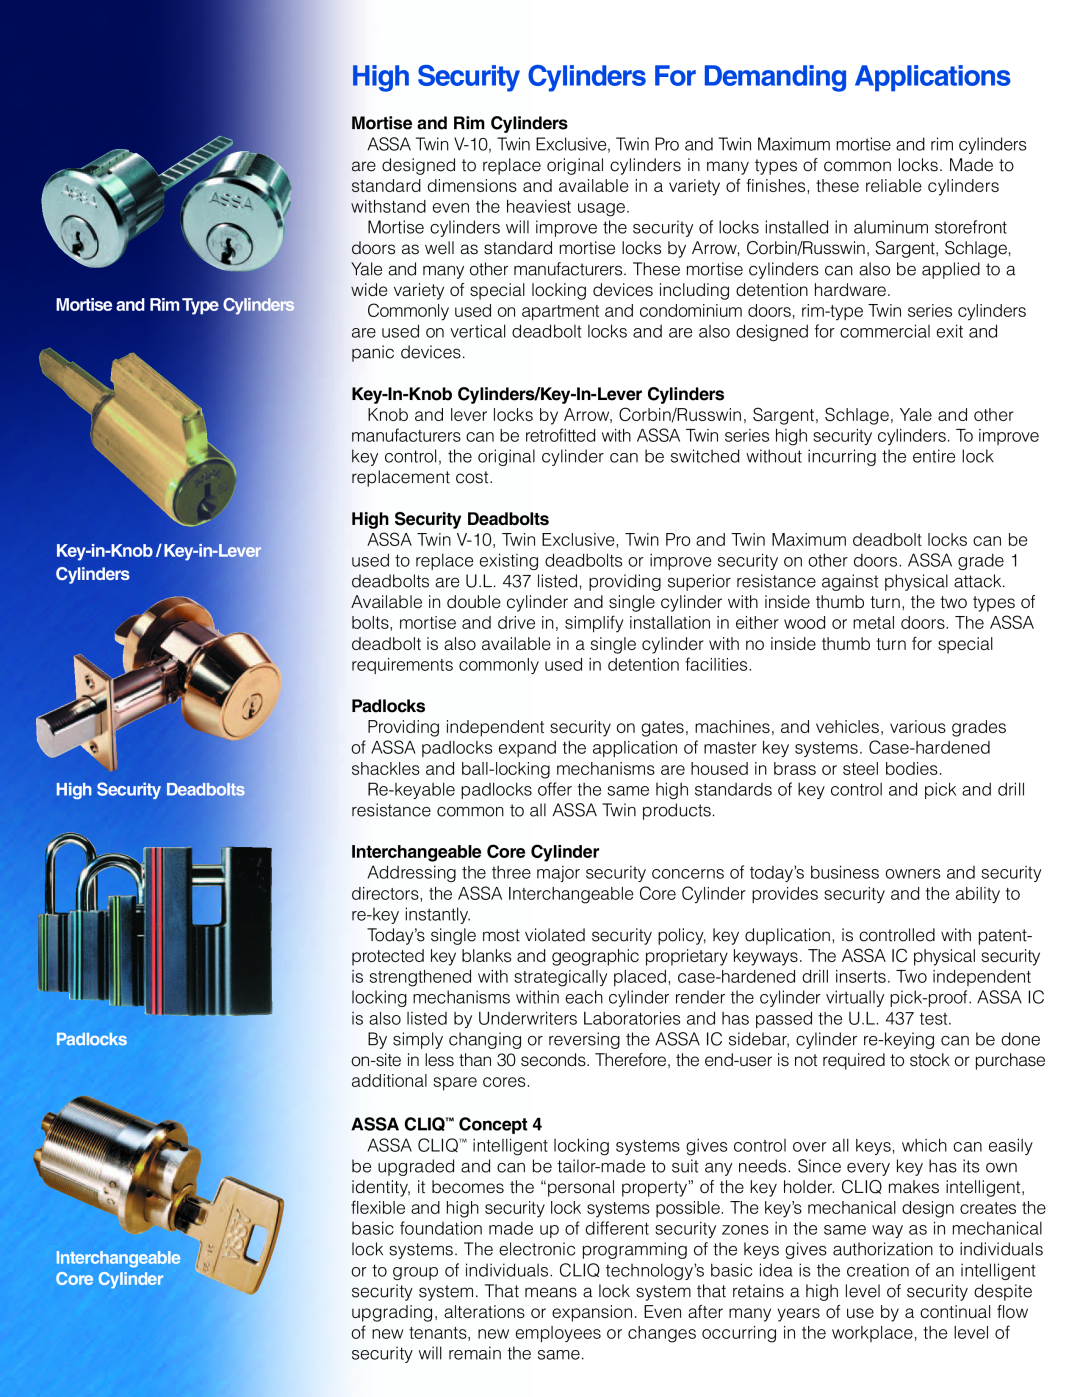 Assa ANSI High Security Cylinders For Demanding Applications, Mortise and Rim Cylinders, High Security Deadbolts, Padlocks 